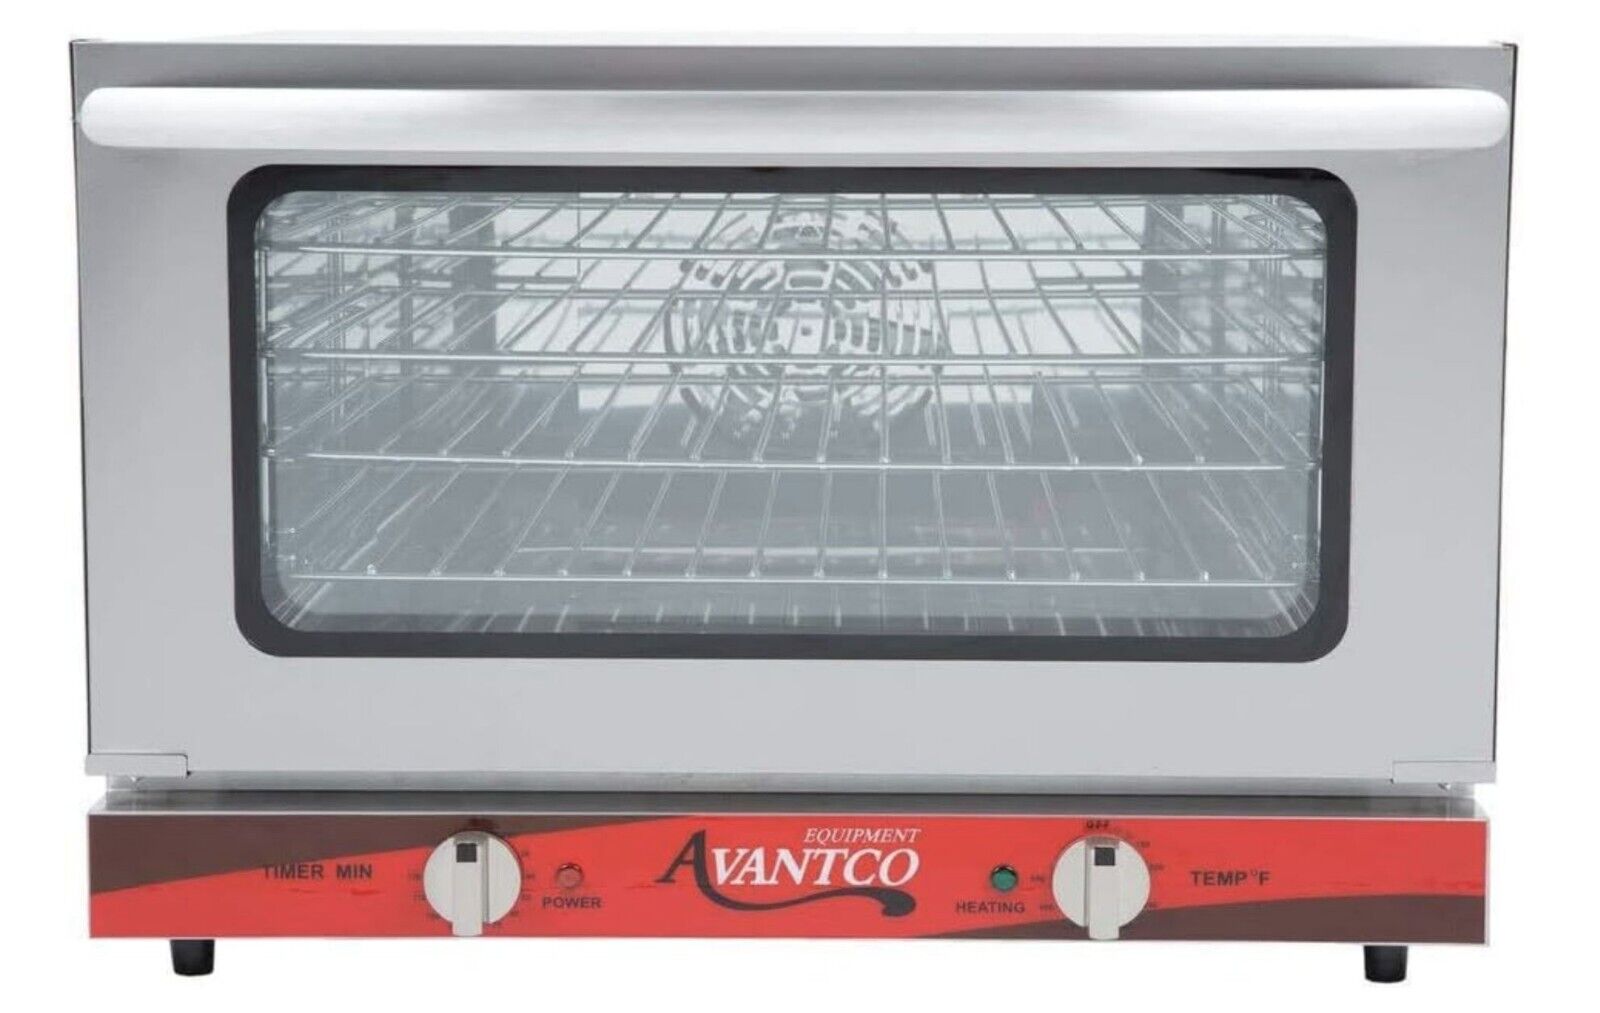 CO-16 Half Size Countertop Convection Oven, 1.5 Cu. Ft. - 120V, 1600W